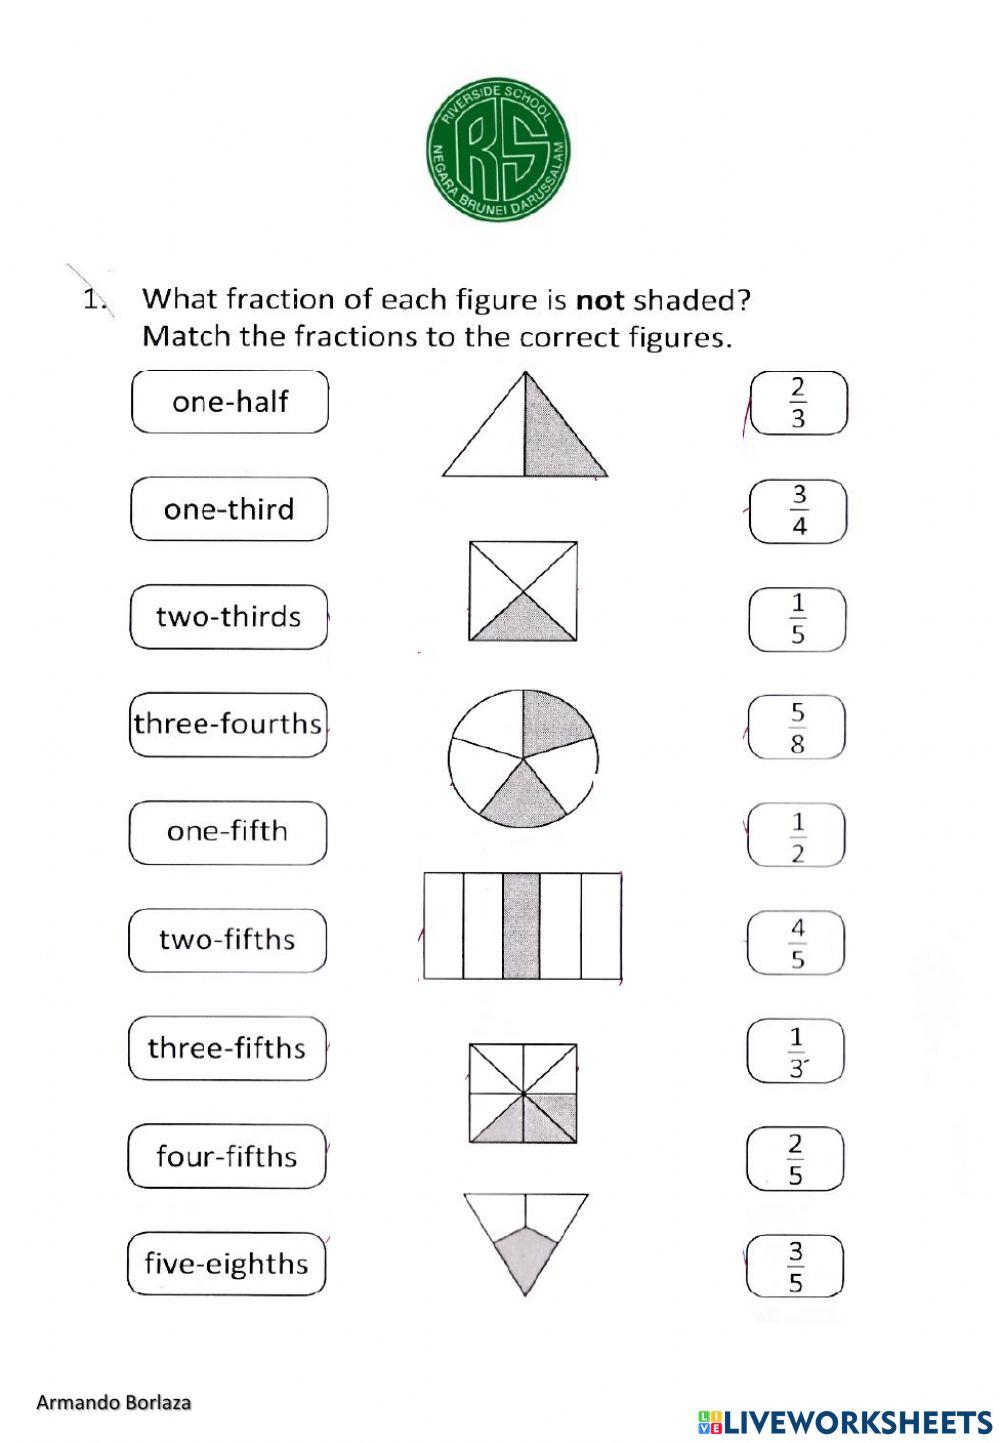 Match the fractions to the correct figure